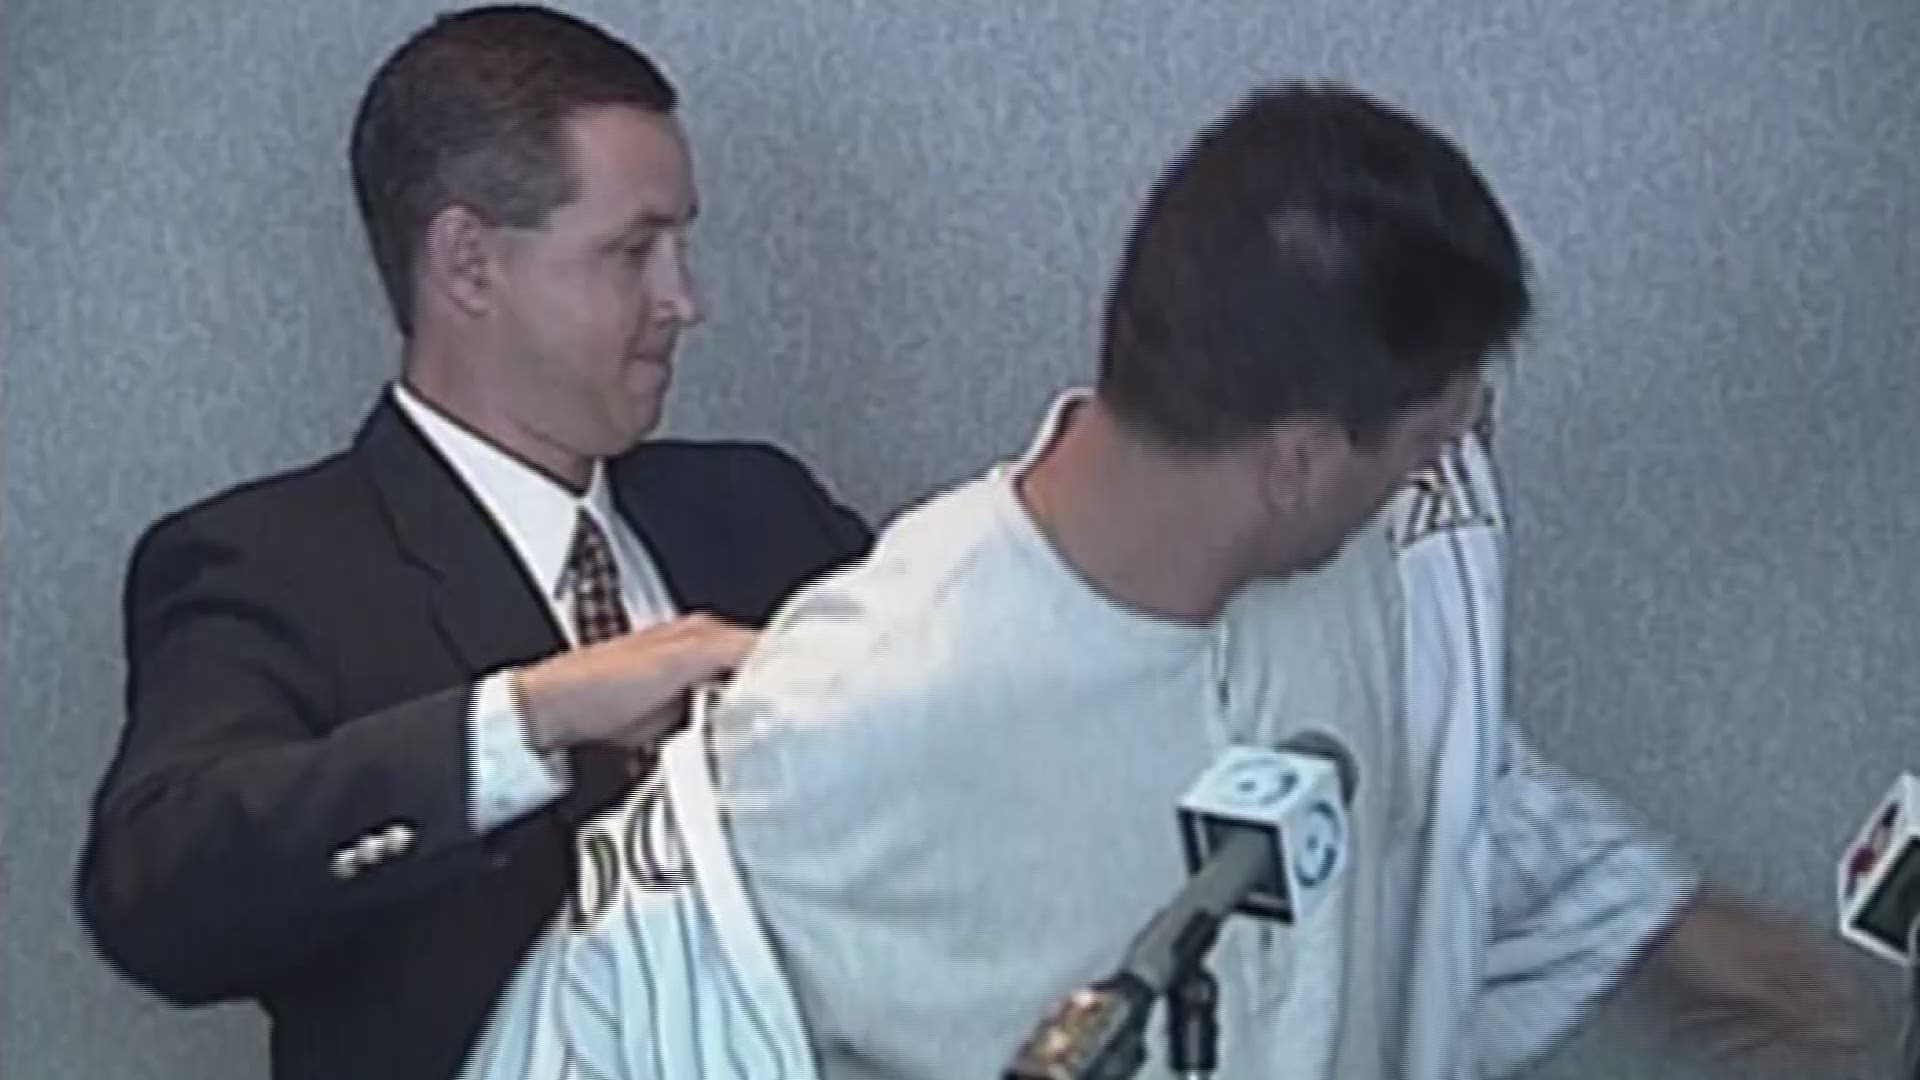 Tennessee baseball announced former Vol Todd Helton would return as director of player personnel. Here's a few clips from Helton's career at Tennessee, including the 2005 College World Series and signing with the Colorado Rockies.